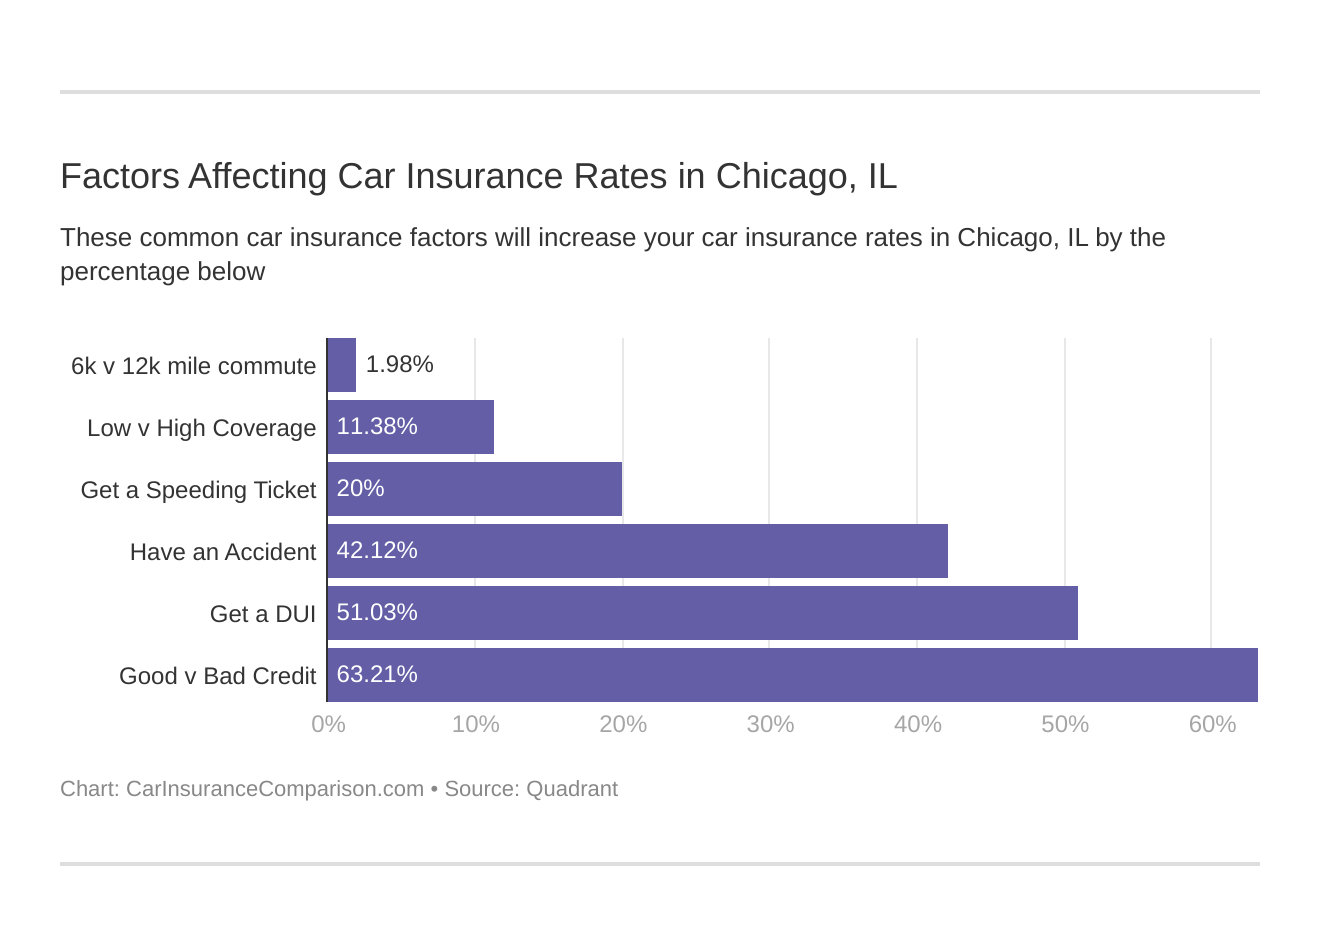 Factors Affecting Car Insurance Rates in Chicago, IL